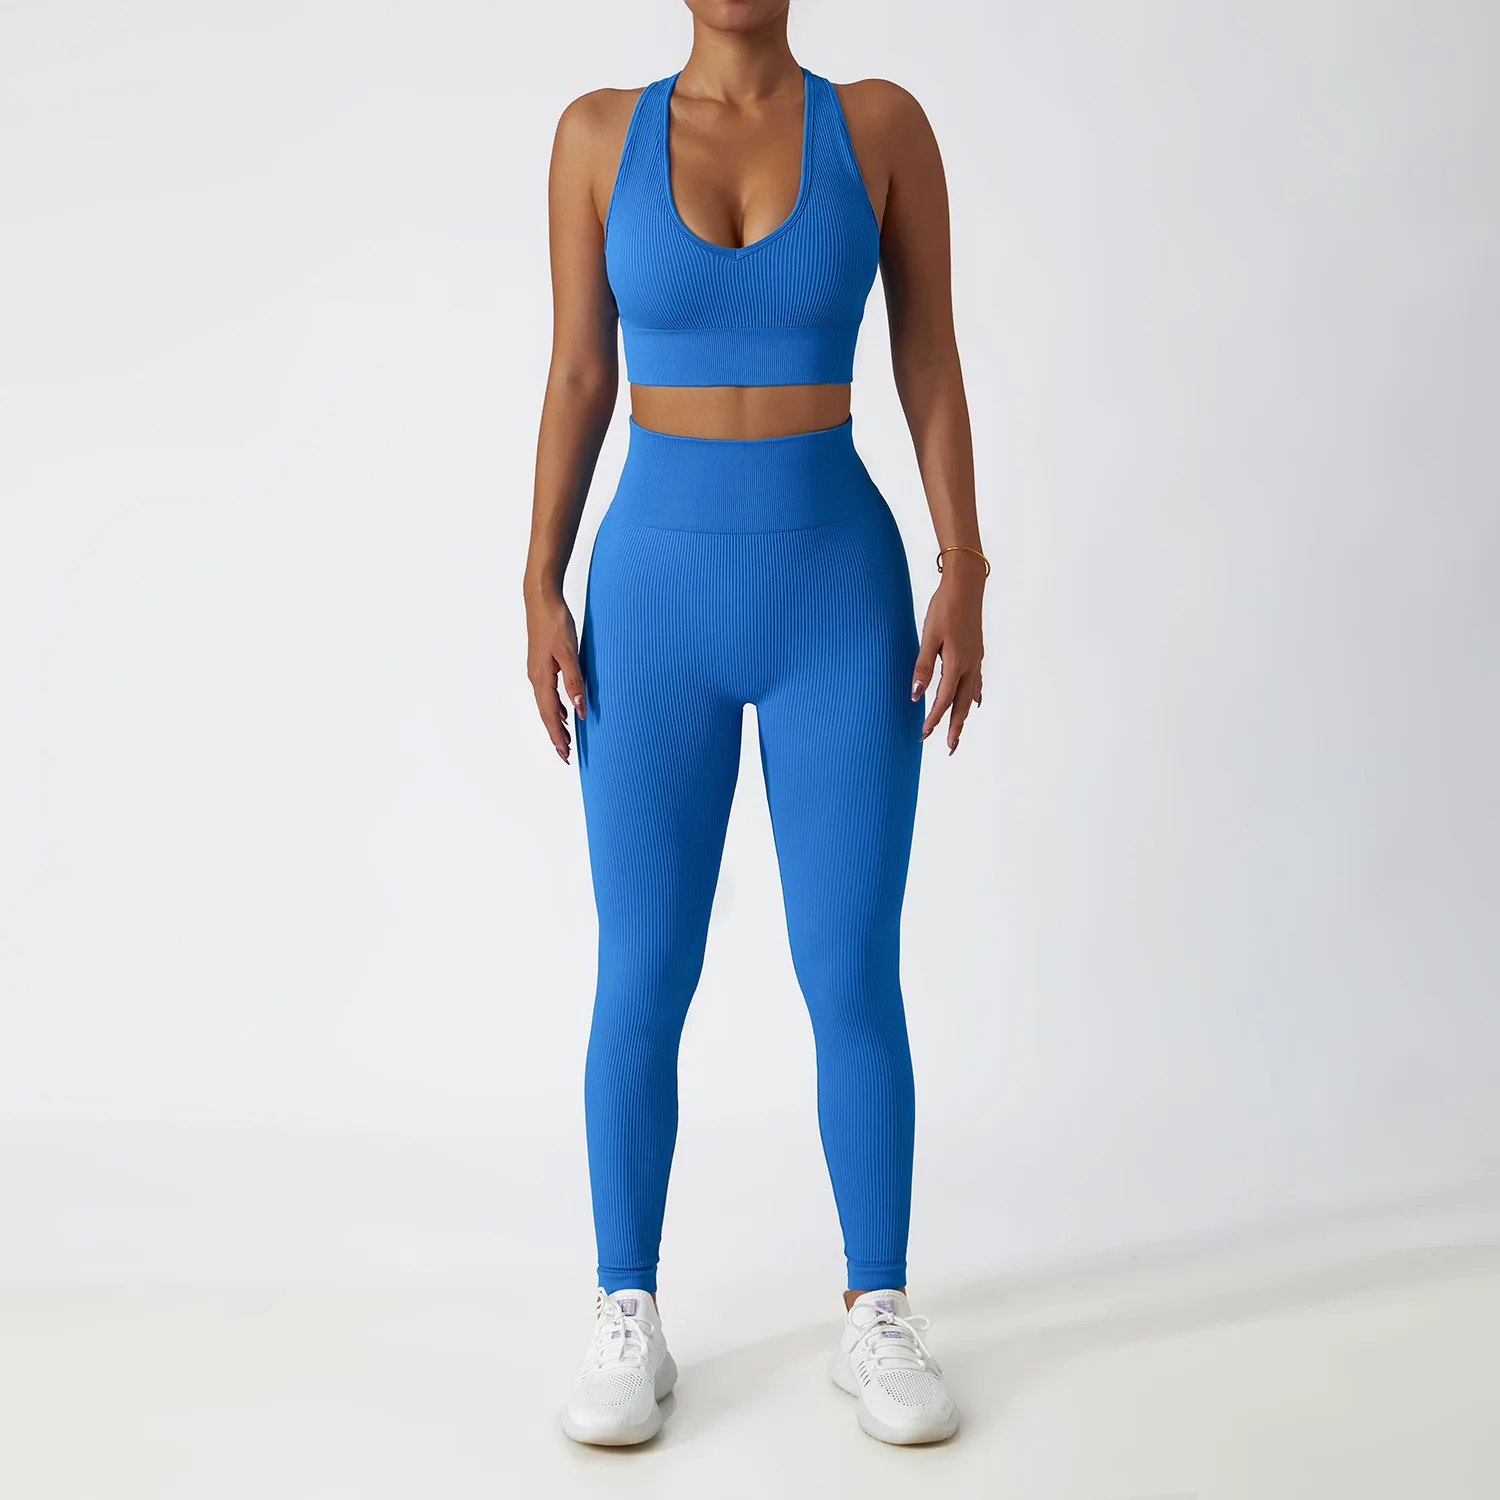 YIYI New Arrival Seamless High Quality Gym Fitness Sets Breathable High Elastic Outdoor Athletic Suits Ribbed Workout Sets